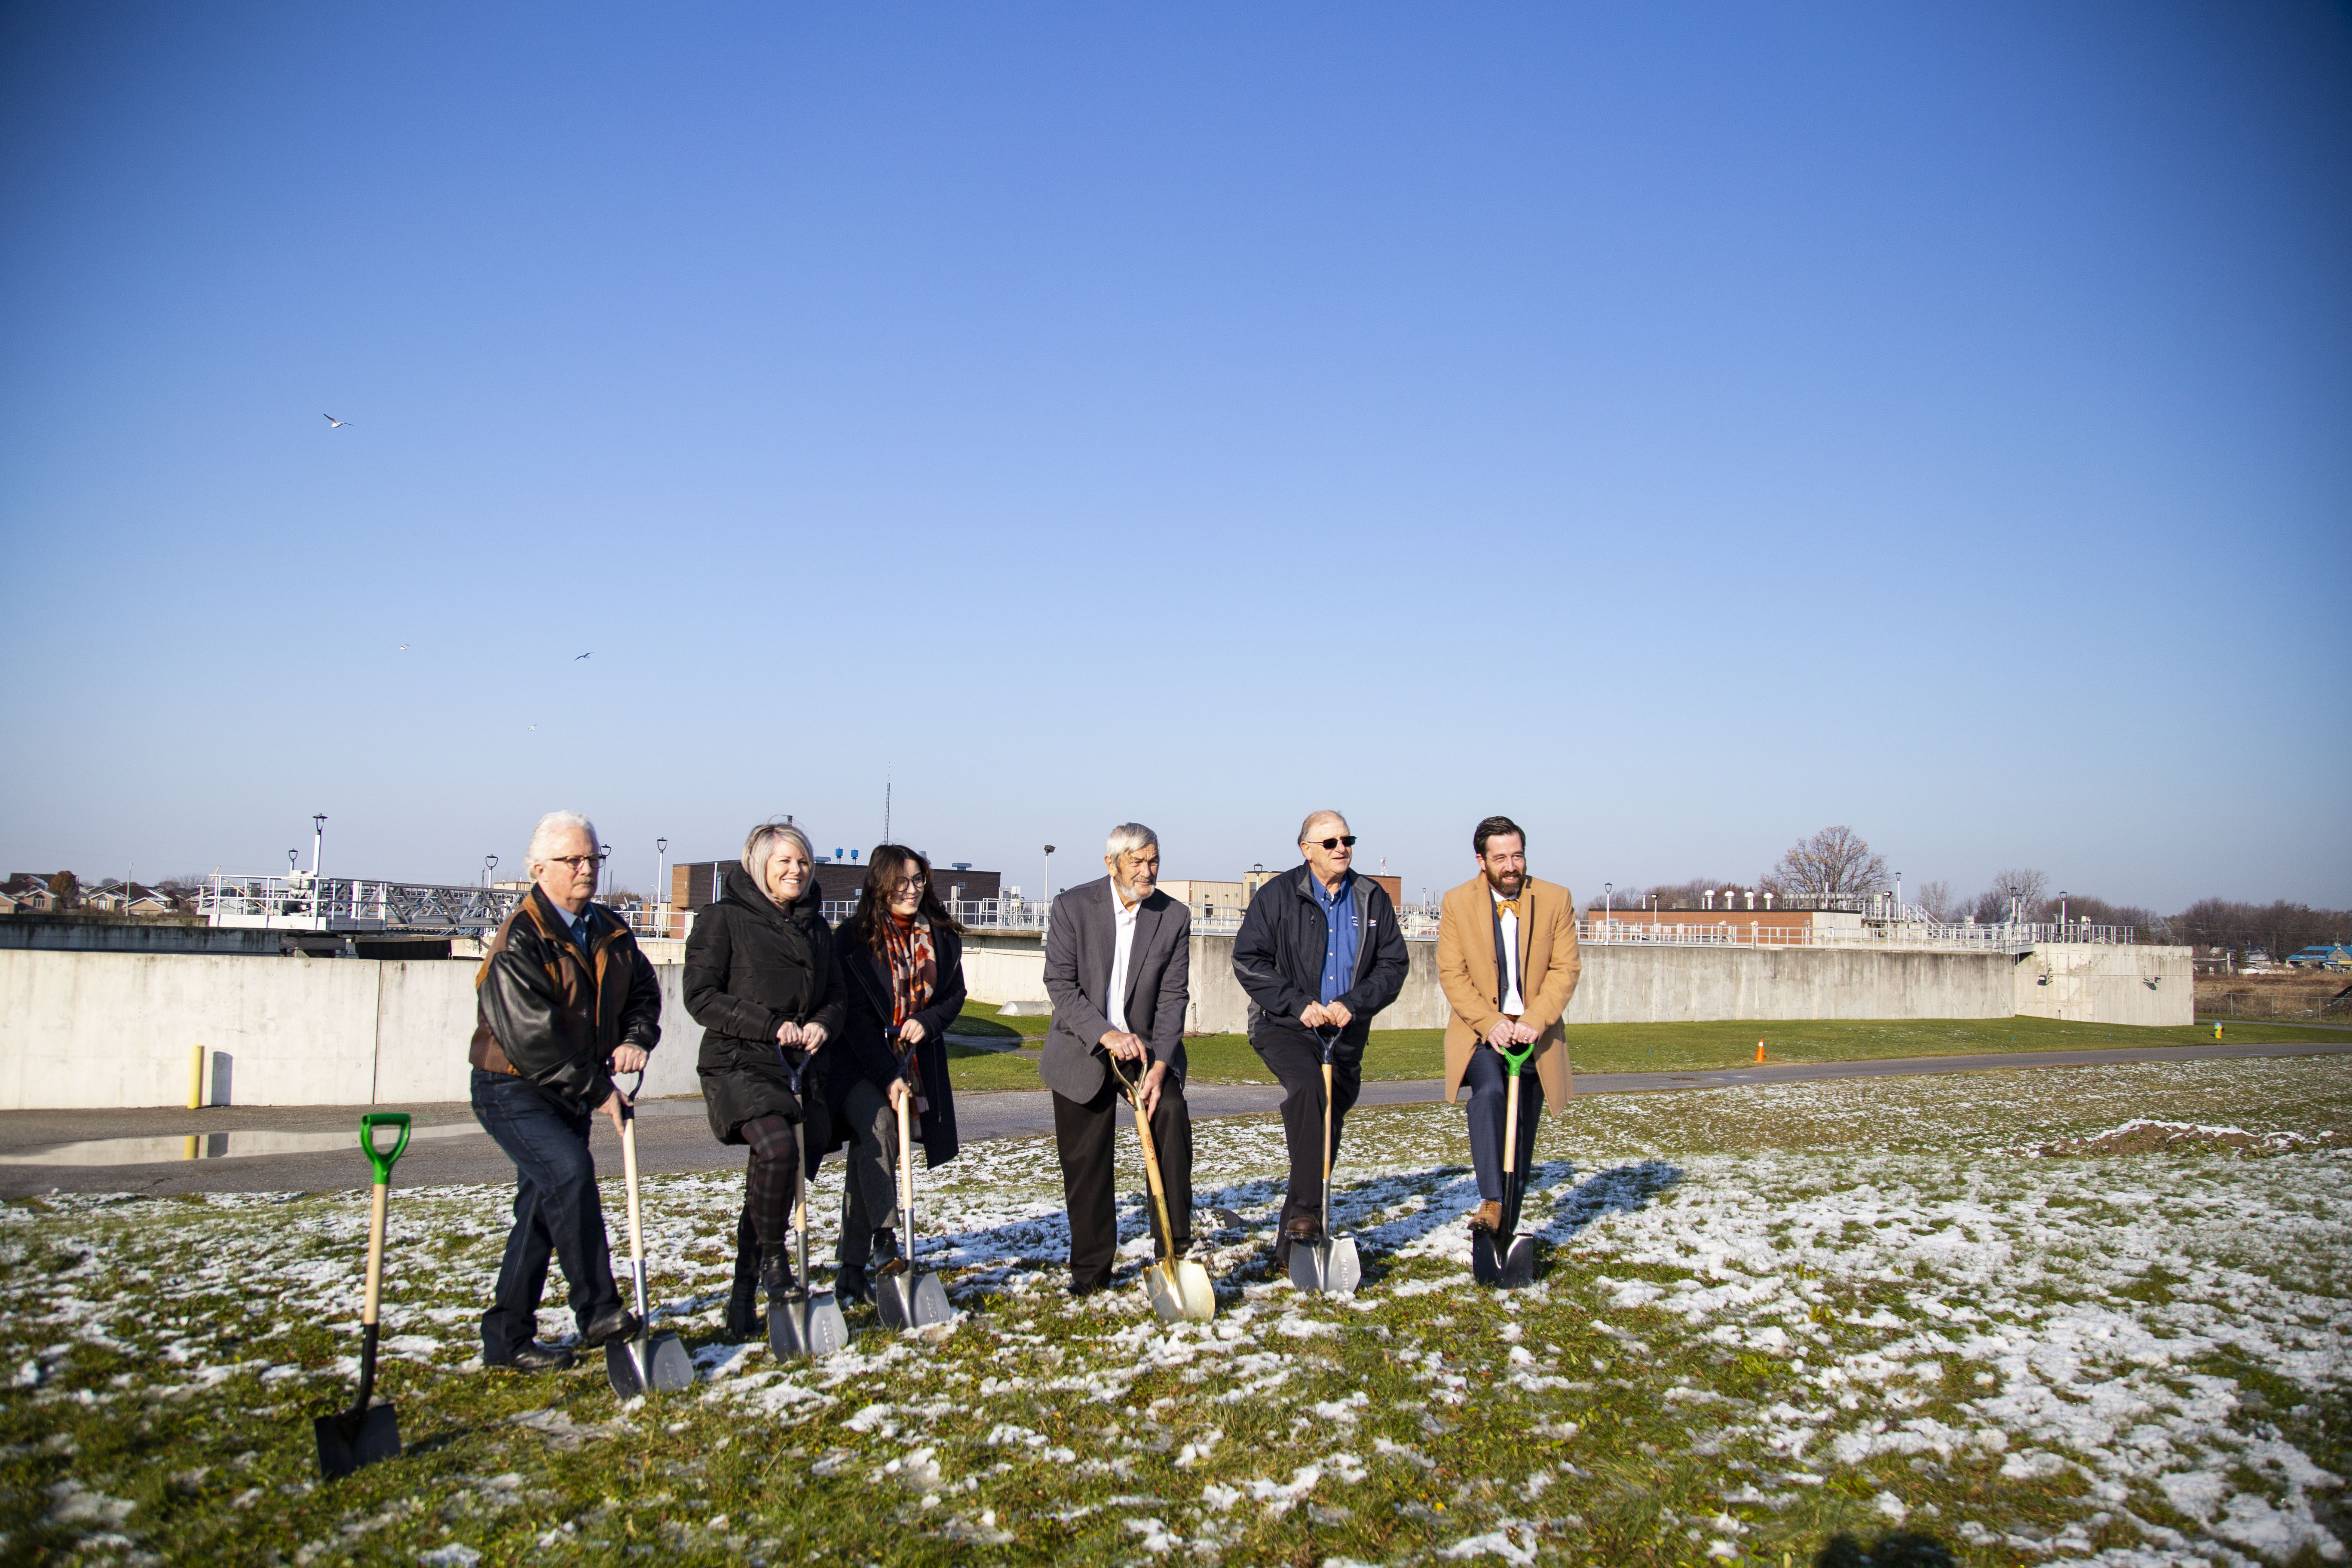 Members of Council in a line preparing for groundbreaking and standing on shovels in front of the current Denis St. Pierre Water Pollution Control Plant.